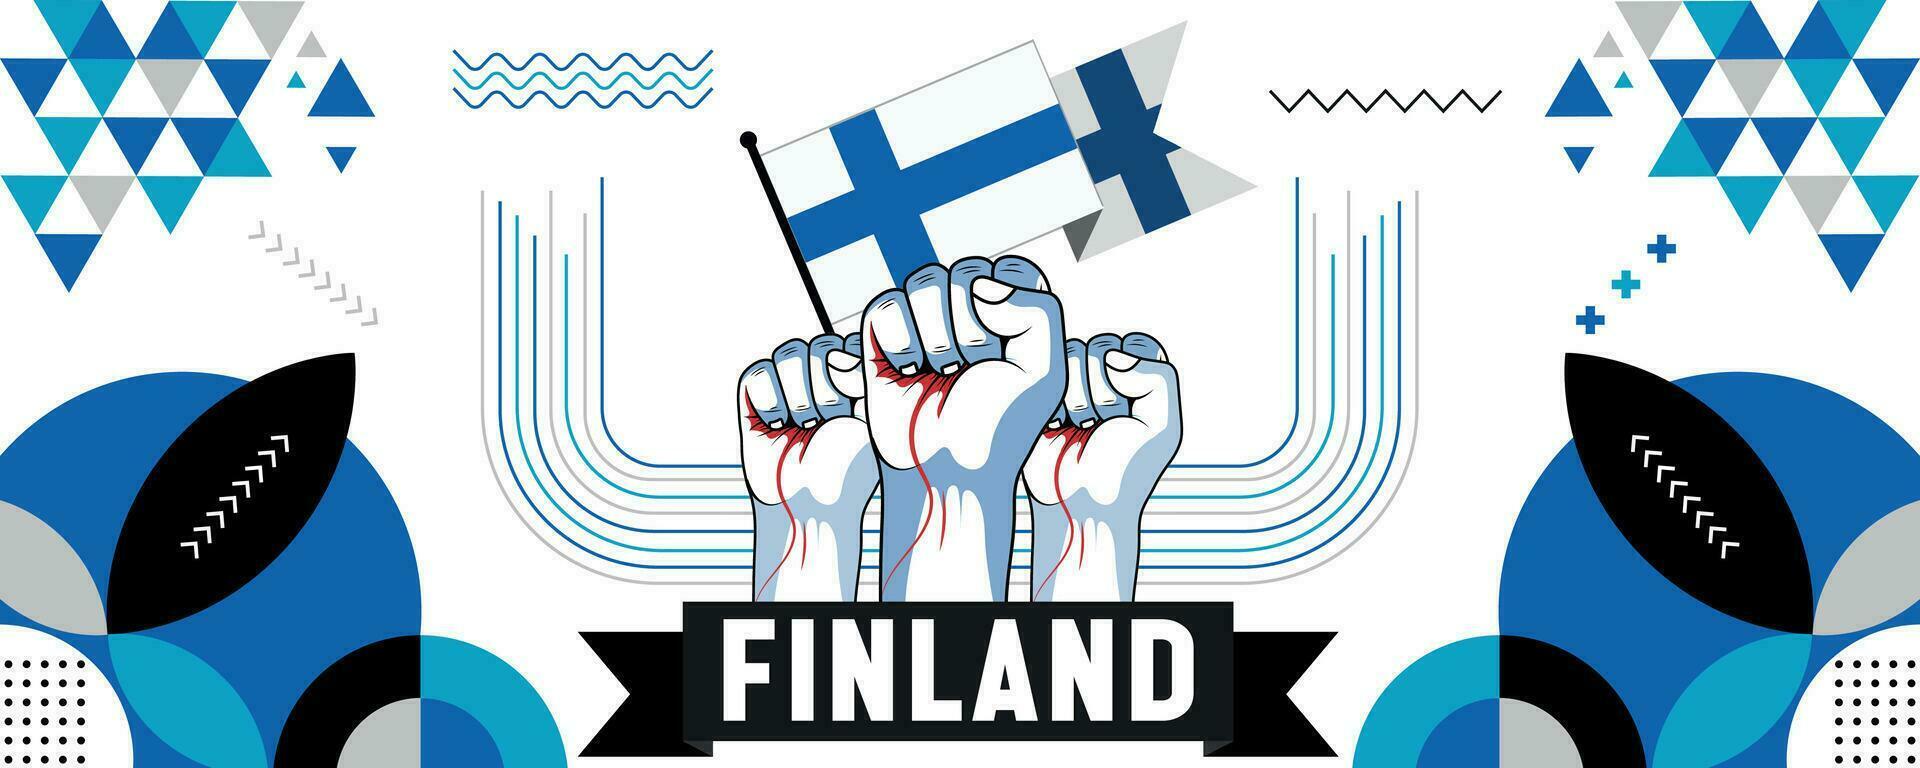 Finland national or independence day banner design for country celebration. Flag and map of Finland with raised fists. Modern retro design with abstract geometric icons. Vector illustration.